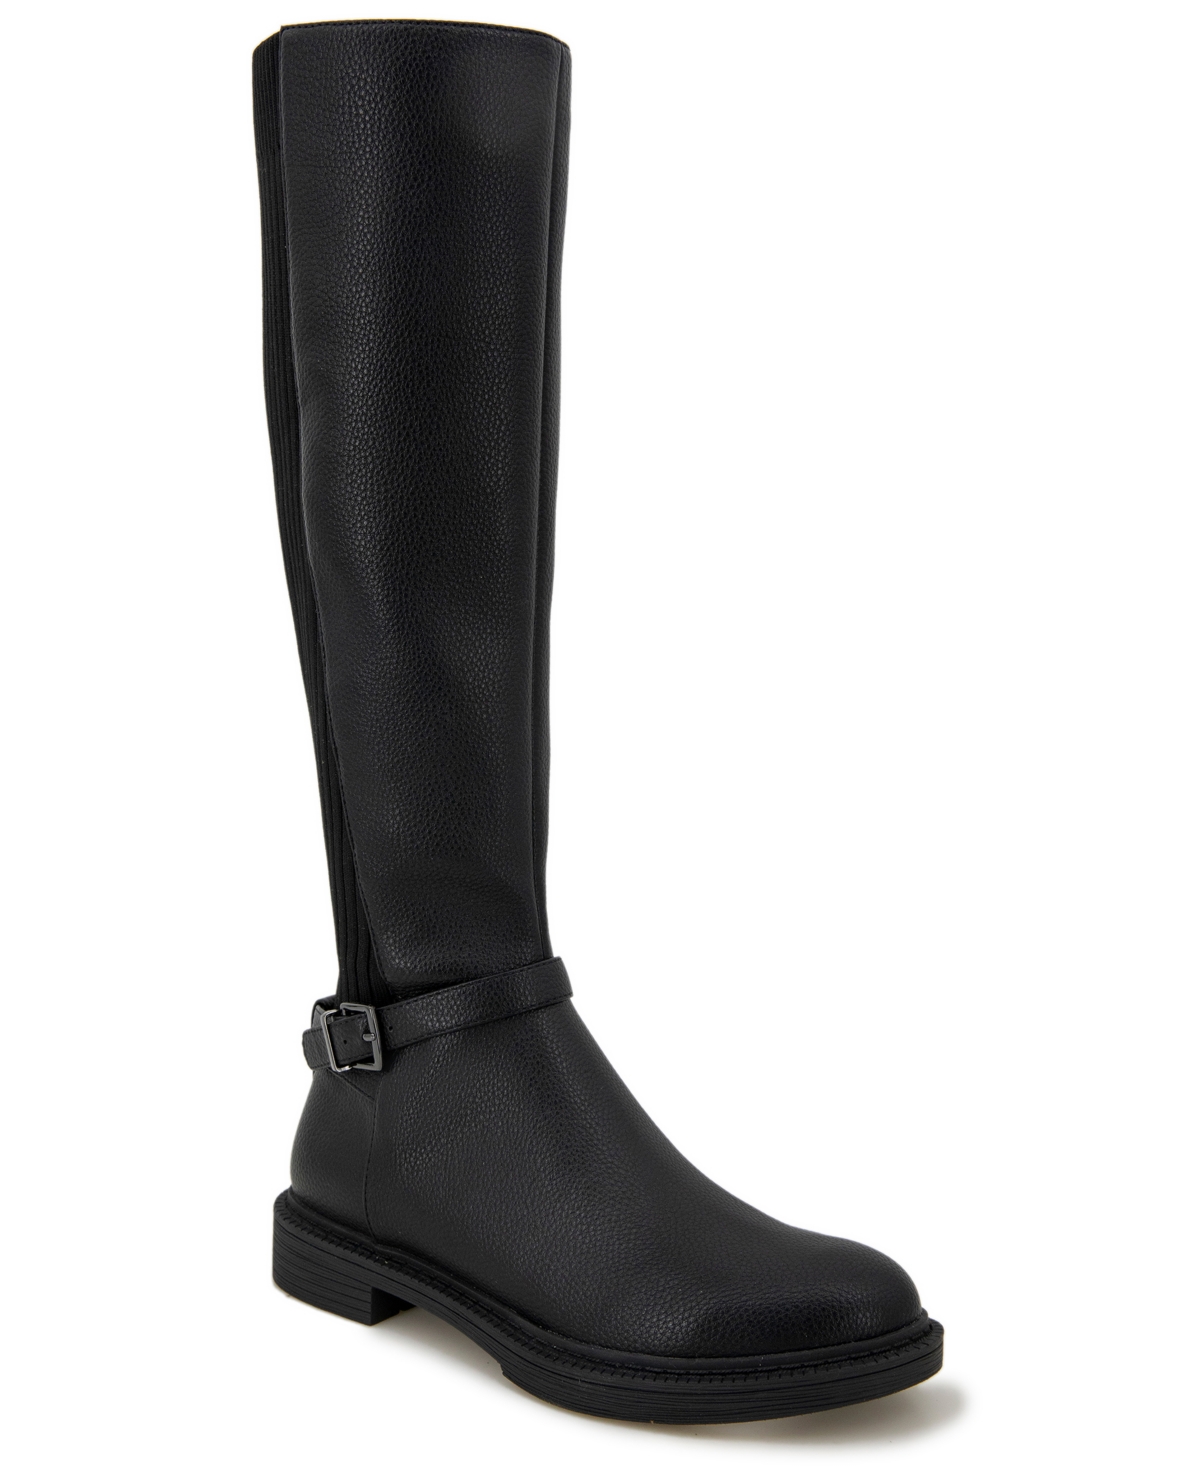 KENNETH COLE REACTION WOMEN'S WINONA RIDING BOOTS